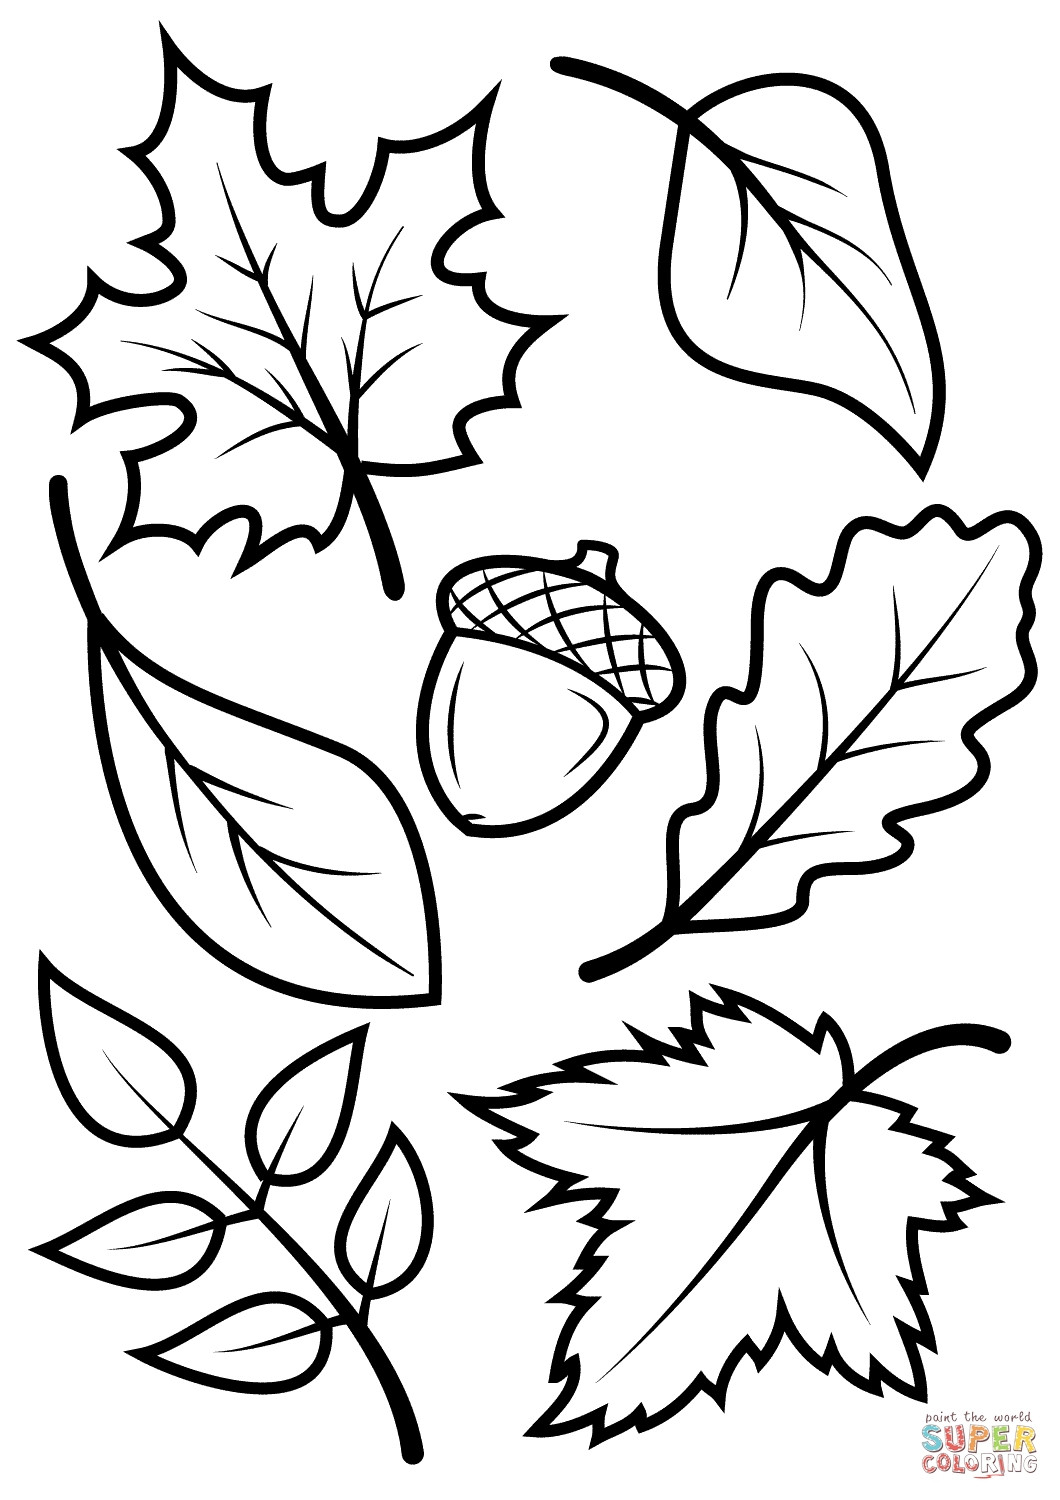 28 Unique Different Types Of Vases 2024 free download different types of vases of new cool vases flower vase coloring page pages flowers in a top i 0d for new cool vases flower vase coloring page pages flowers in a top i 0d